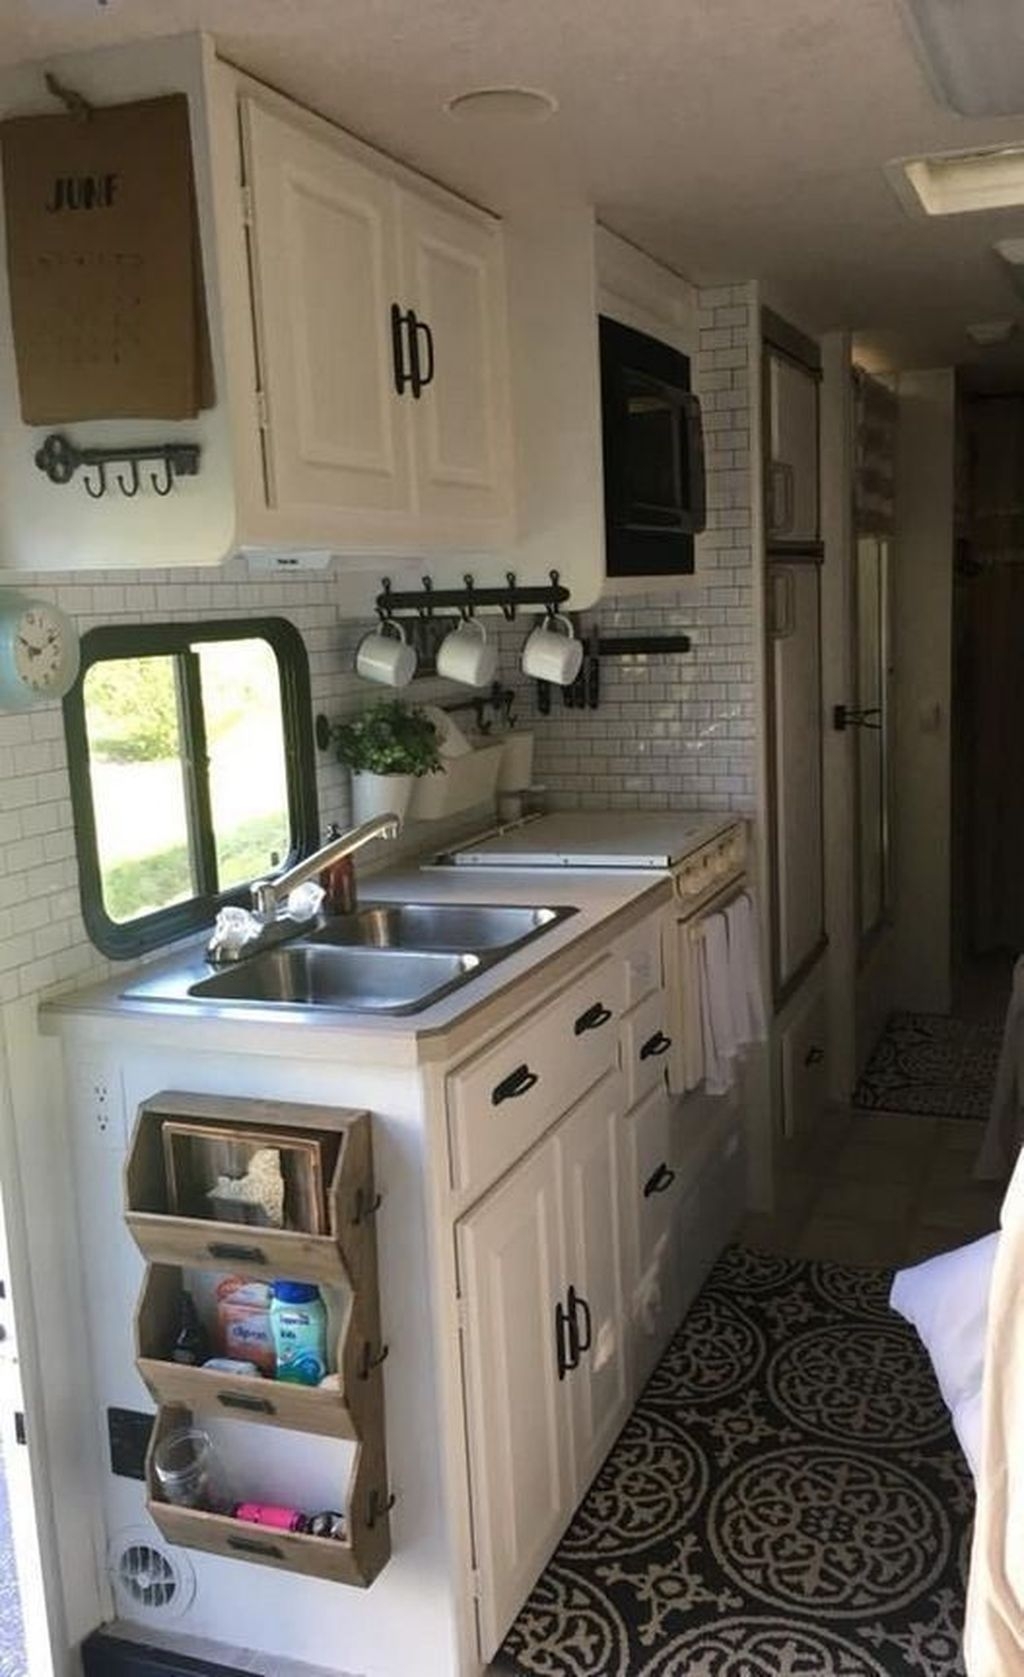 Best RV Kitchen Storage Ideas For Cozy Cook When The Camping 50